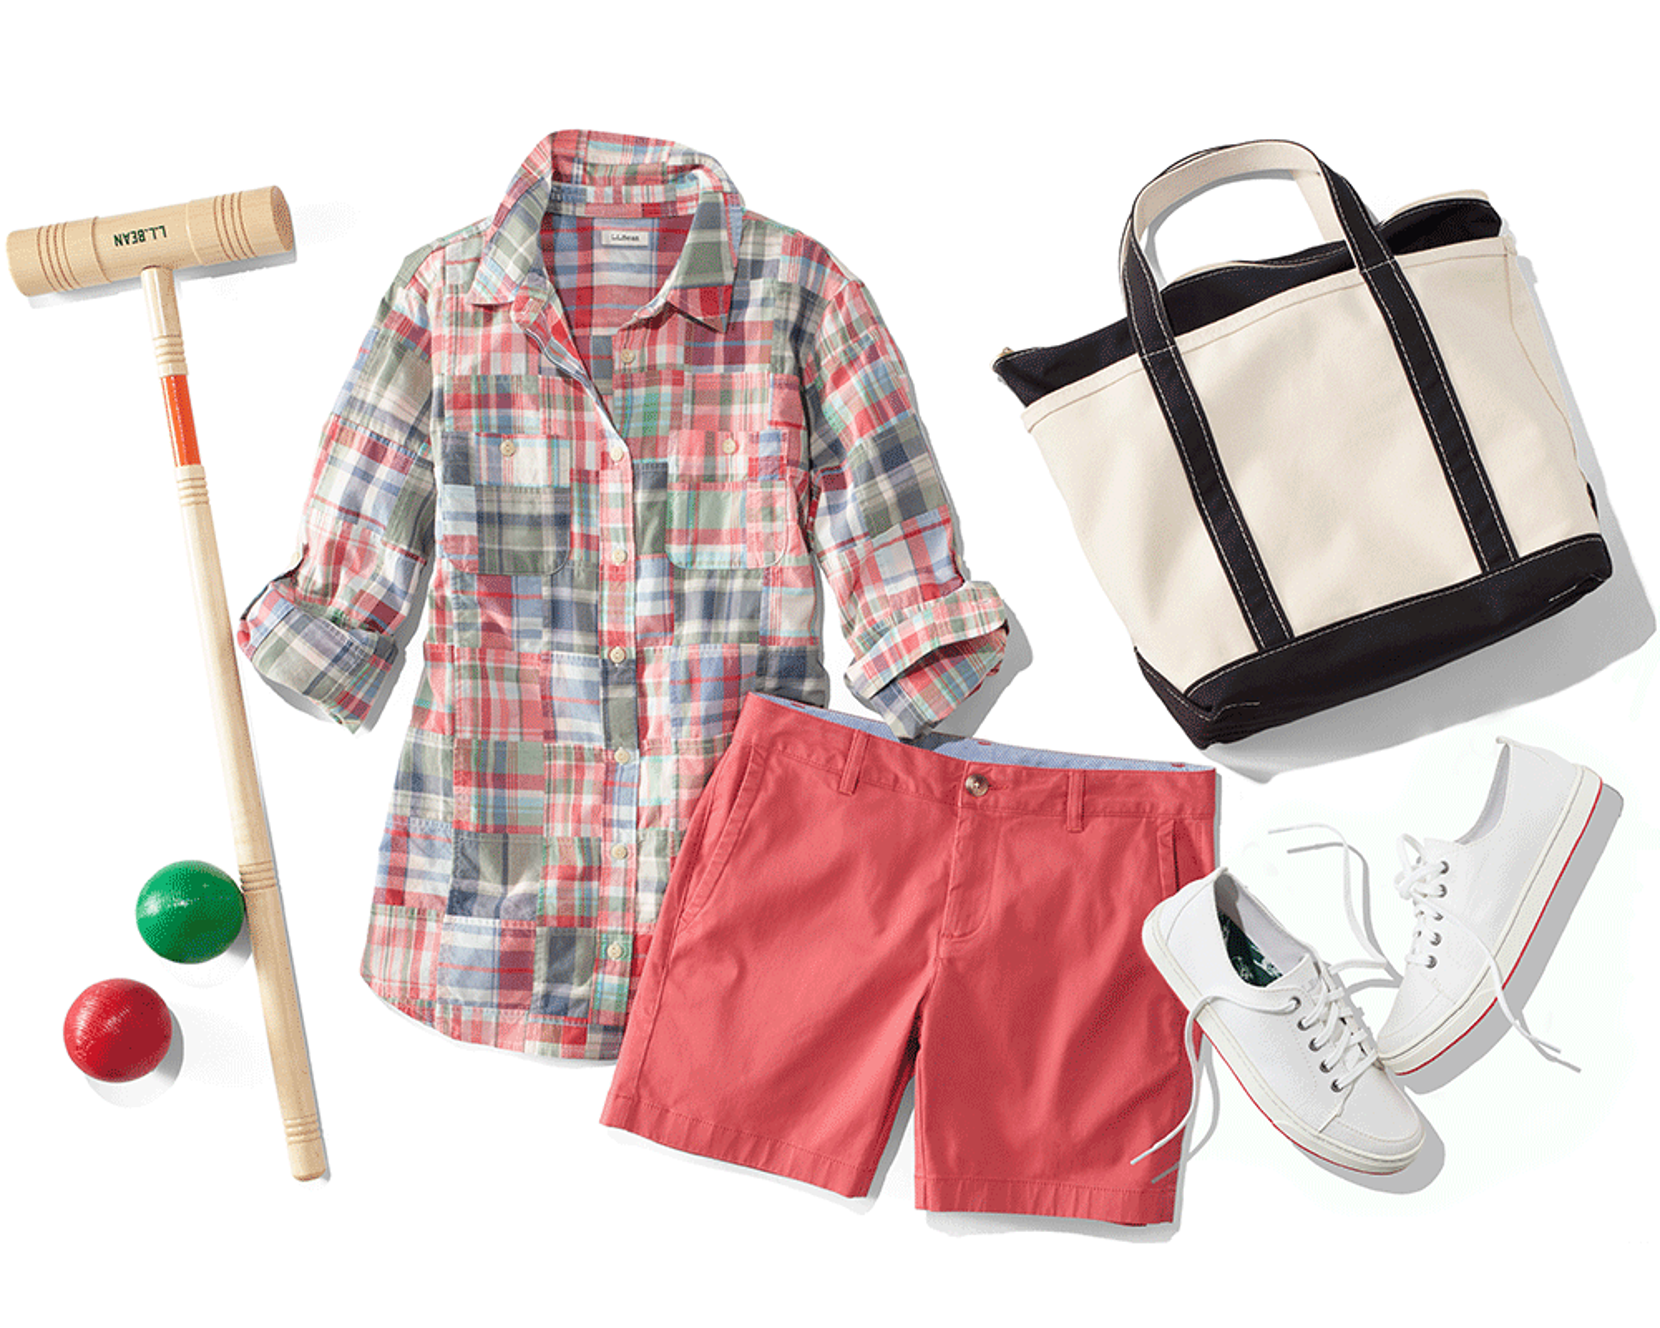 An assortment of spring clothing and accessories.